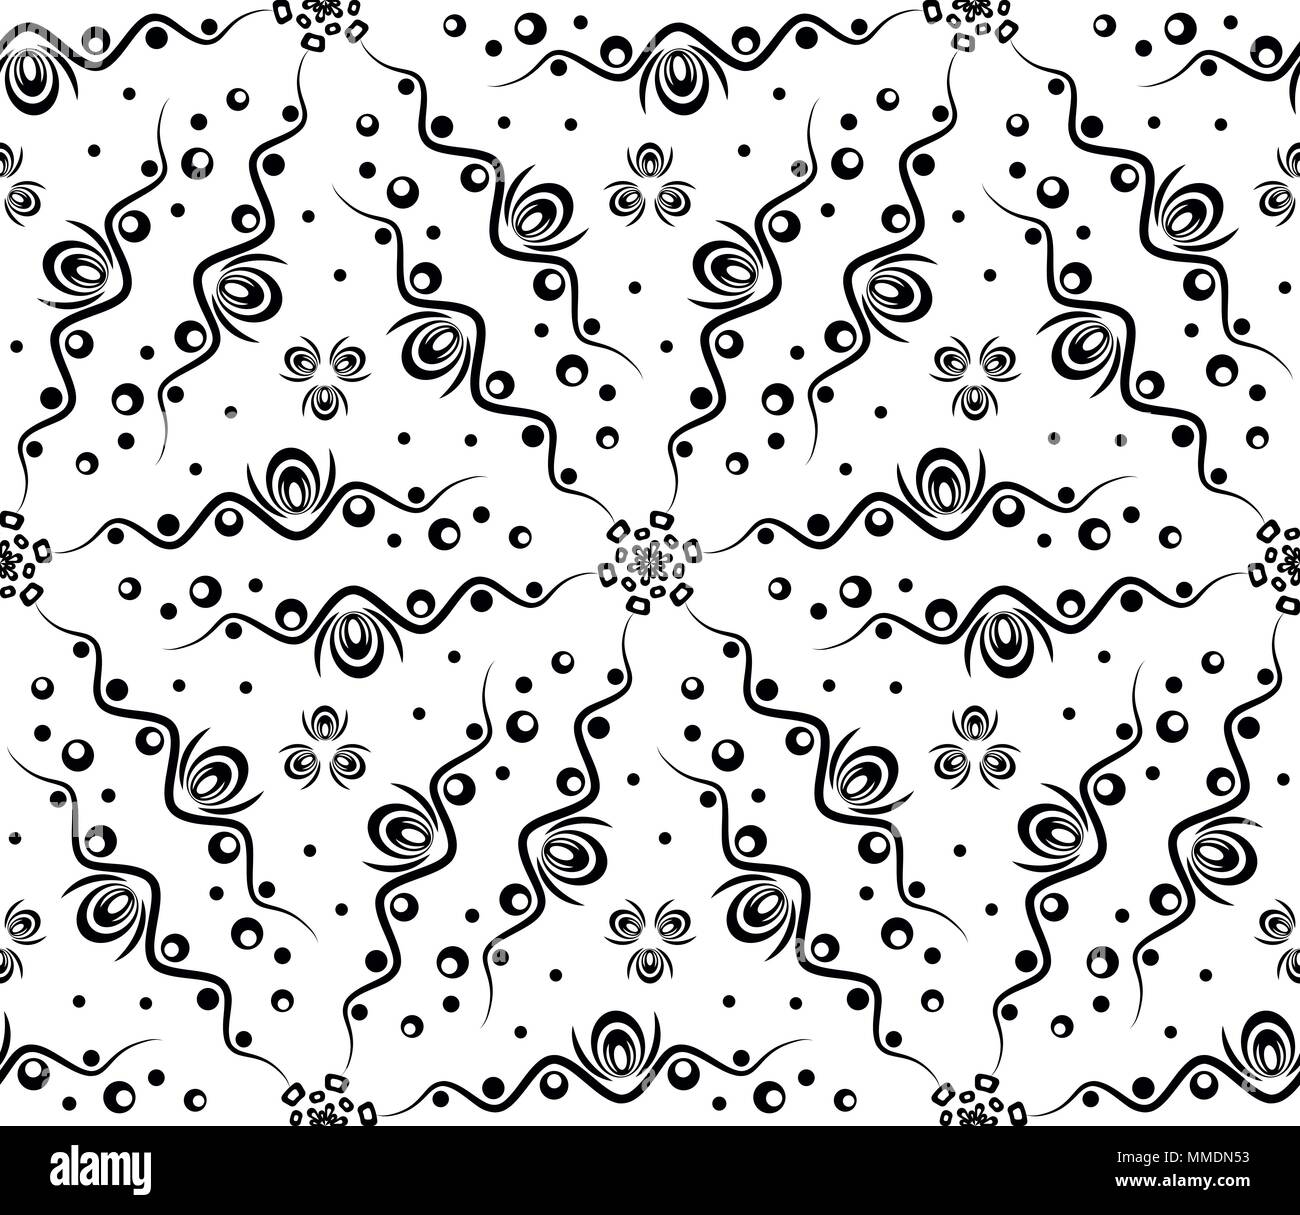 Abstract seamless pattern with waves and circles. Stock Vector